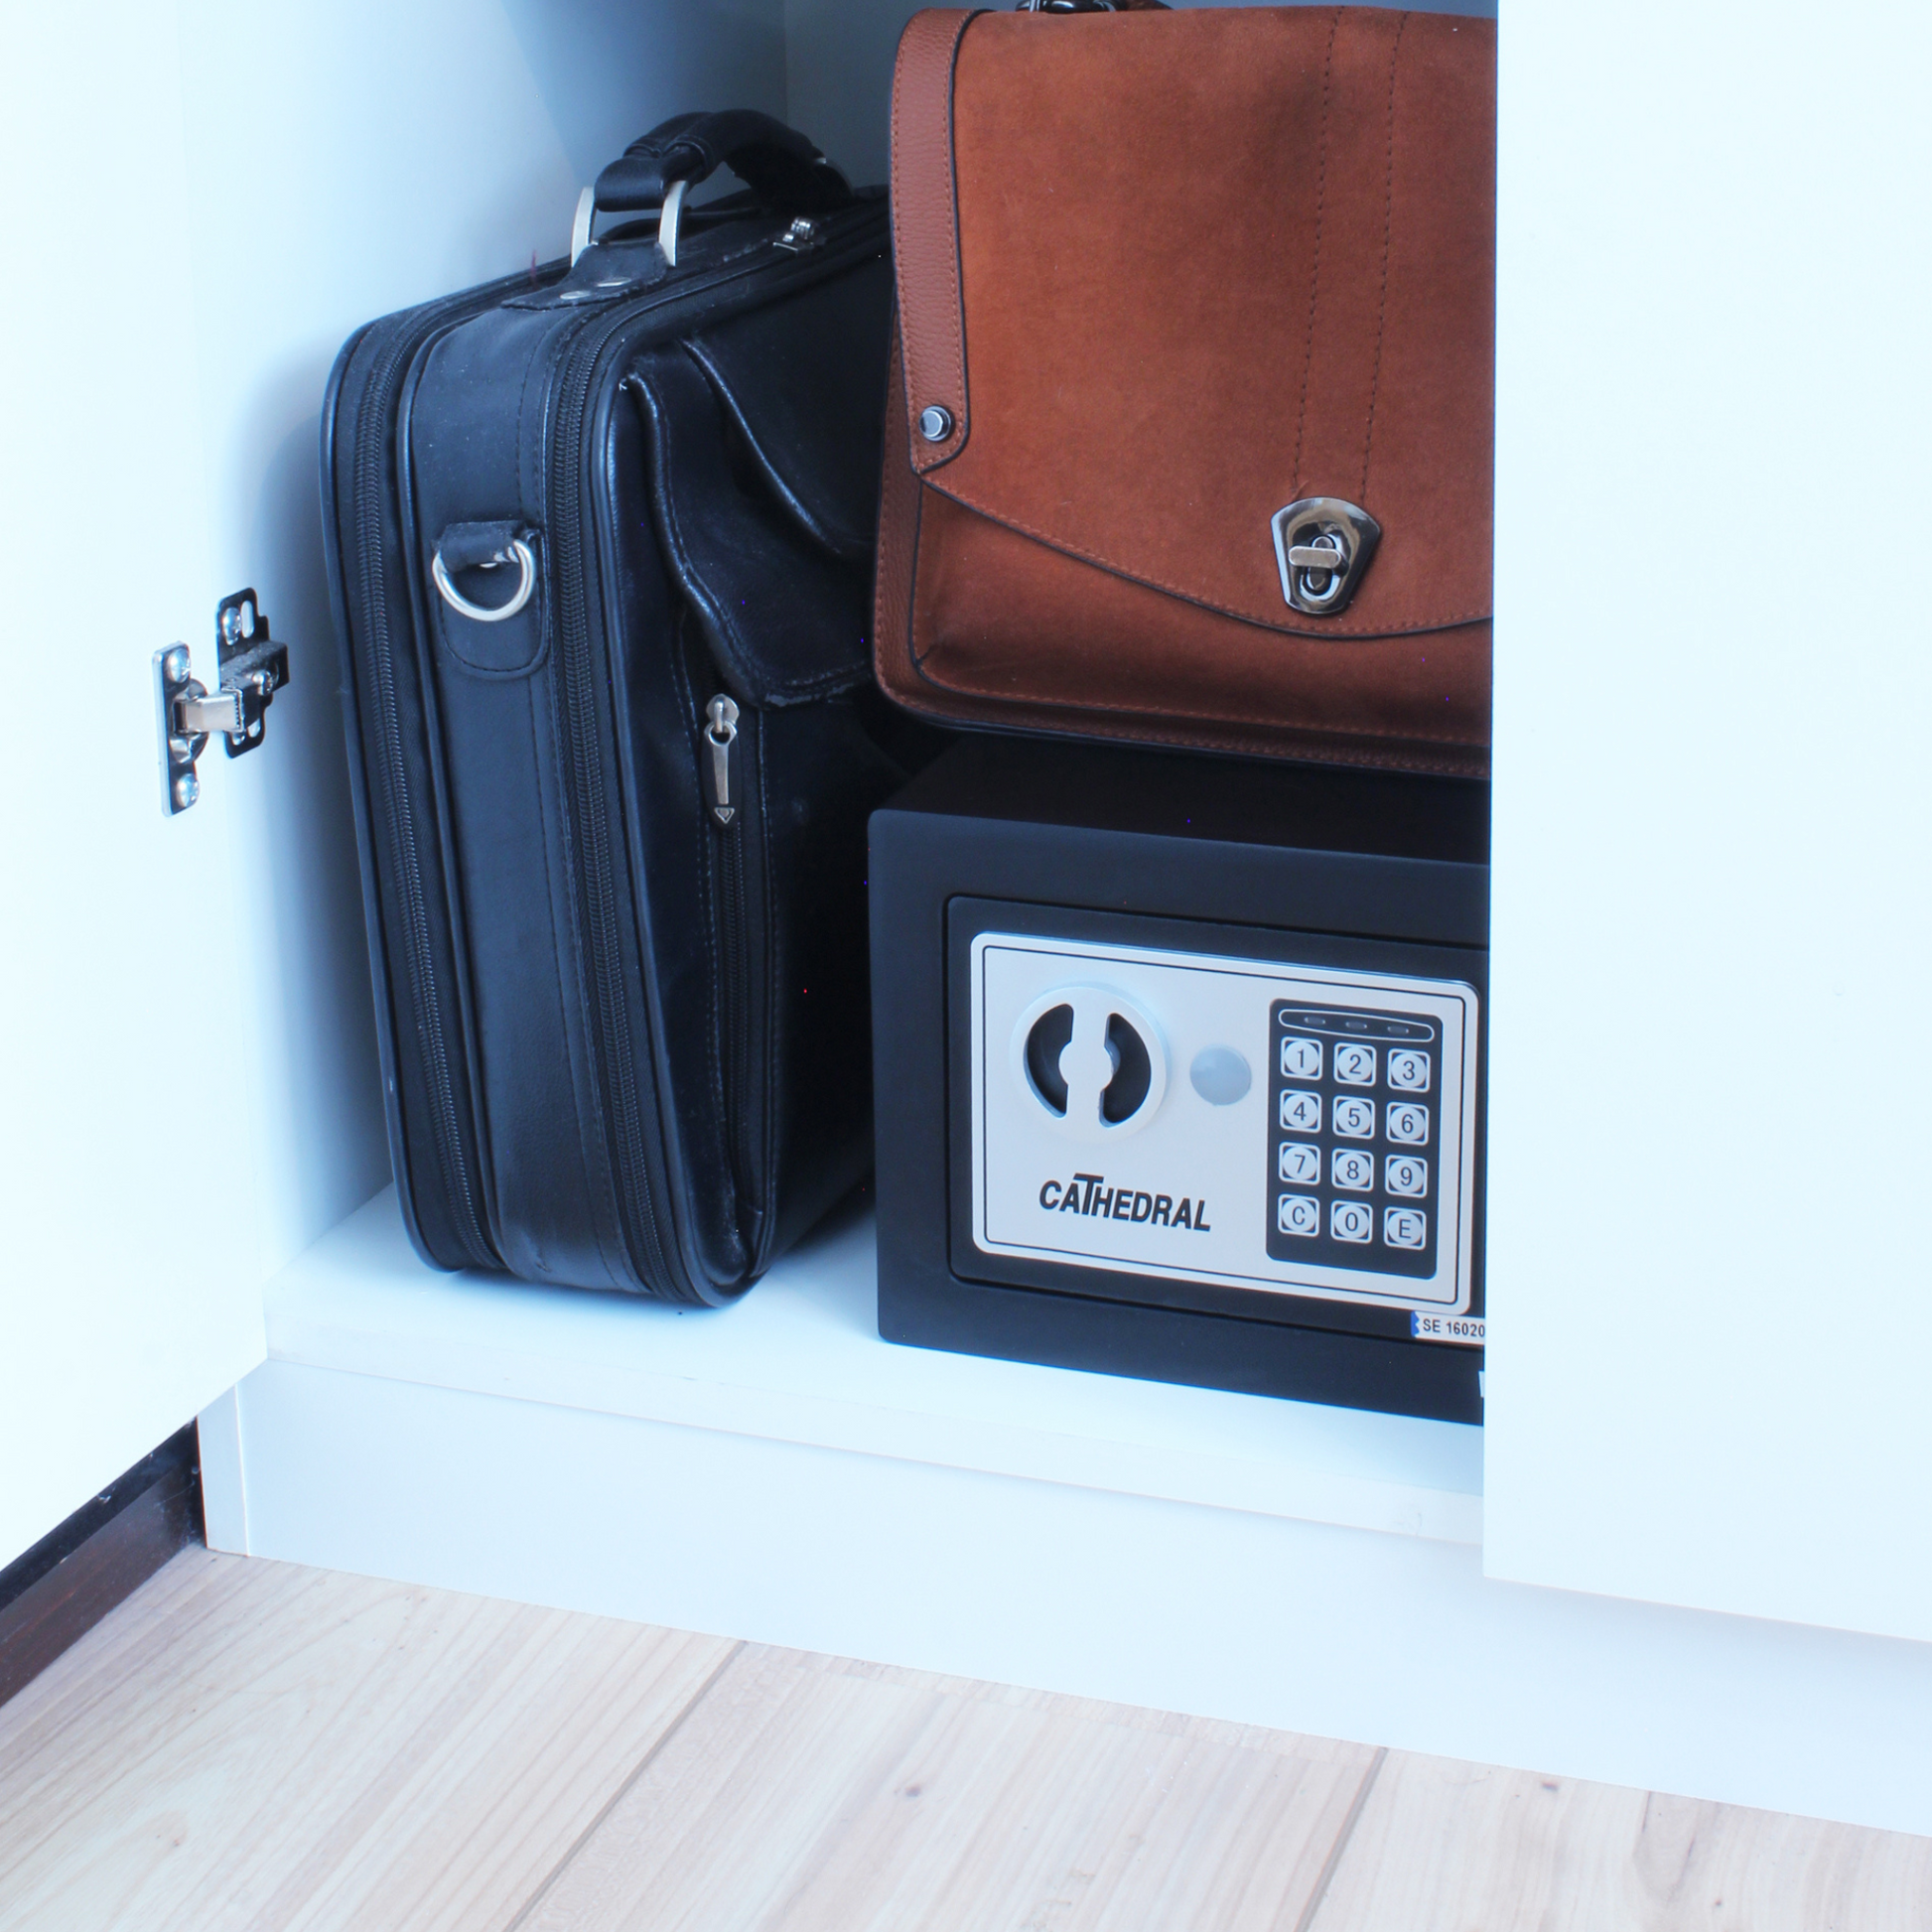 A Cathedral Products EA15 5 Litre Electronic Digital Safe with manual override is neatly tucked in a white cupboard beside a black briefcase and a brown messenger bag, illustrating a practical and discreet home security solution.